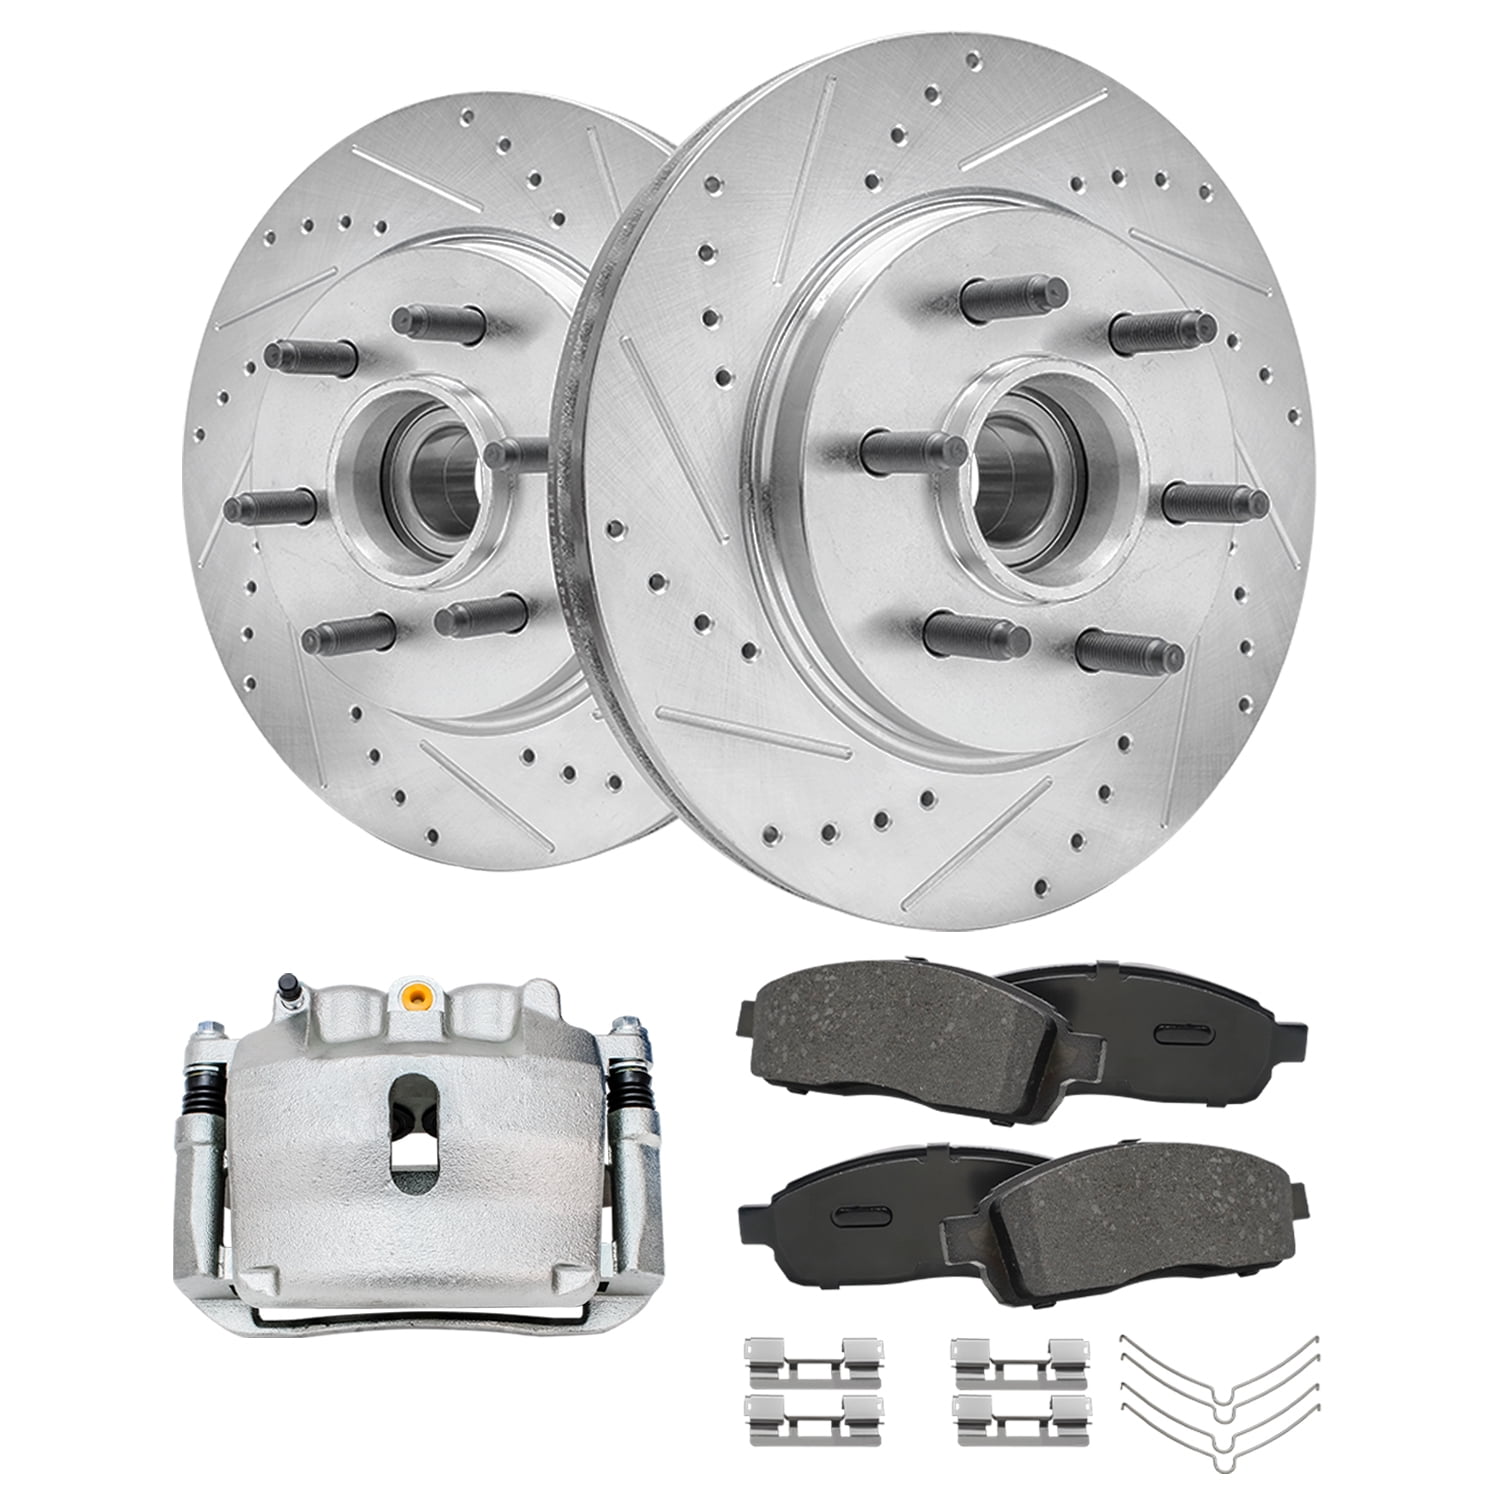 Detroit Axle - 2WD 6-Lug Front Drilled Rotors Ceramic Pads Left Brake  Caliper Replacement for 2004 2005 Ford F-150